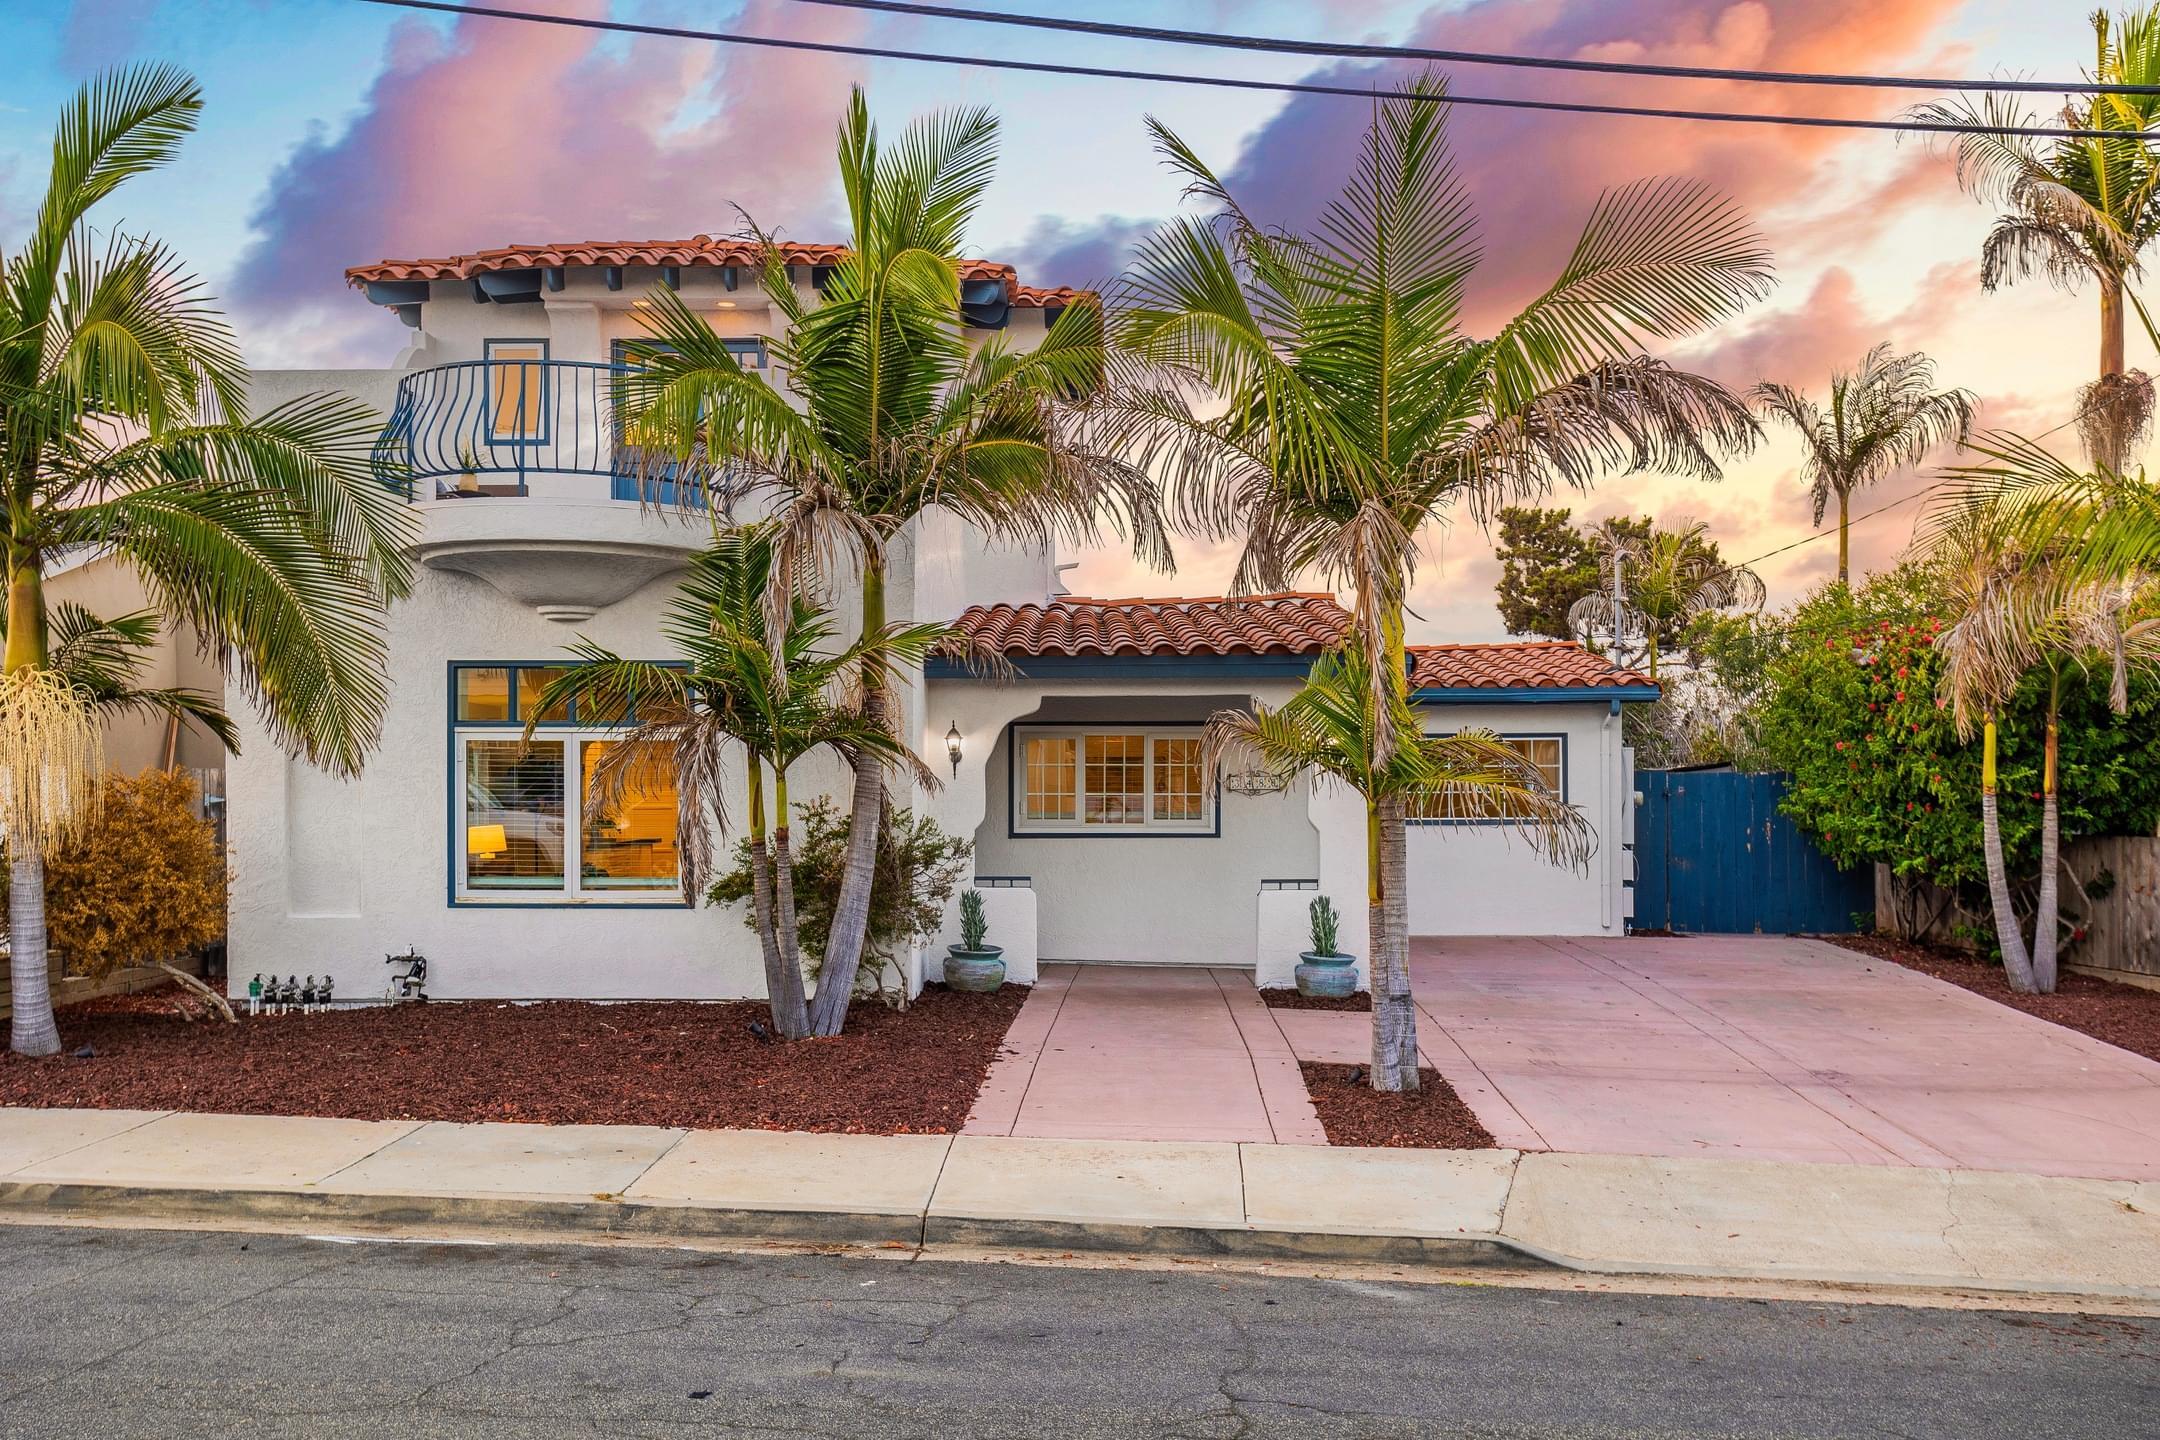 Stunning two-story retreat situated on a . 37 acre lot on a peaceful street in Point Loma. Enter the home to find an open floor plan with high ceilings and accent windows throughout! 